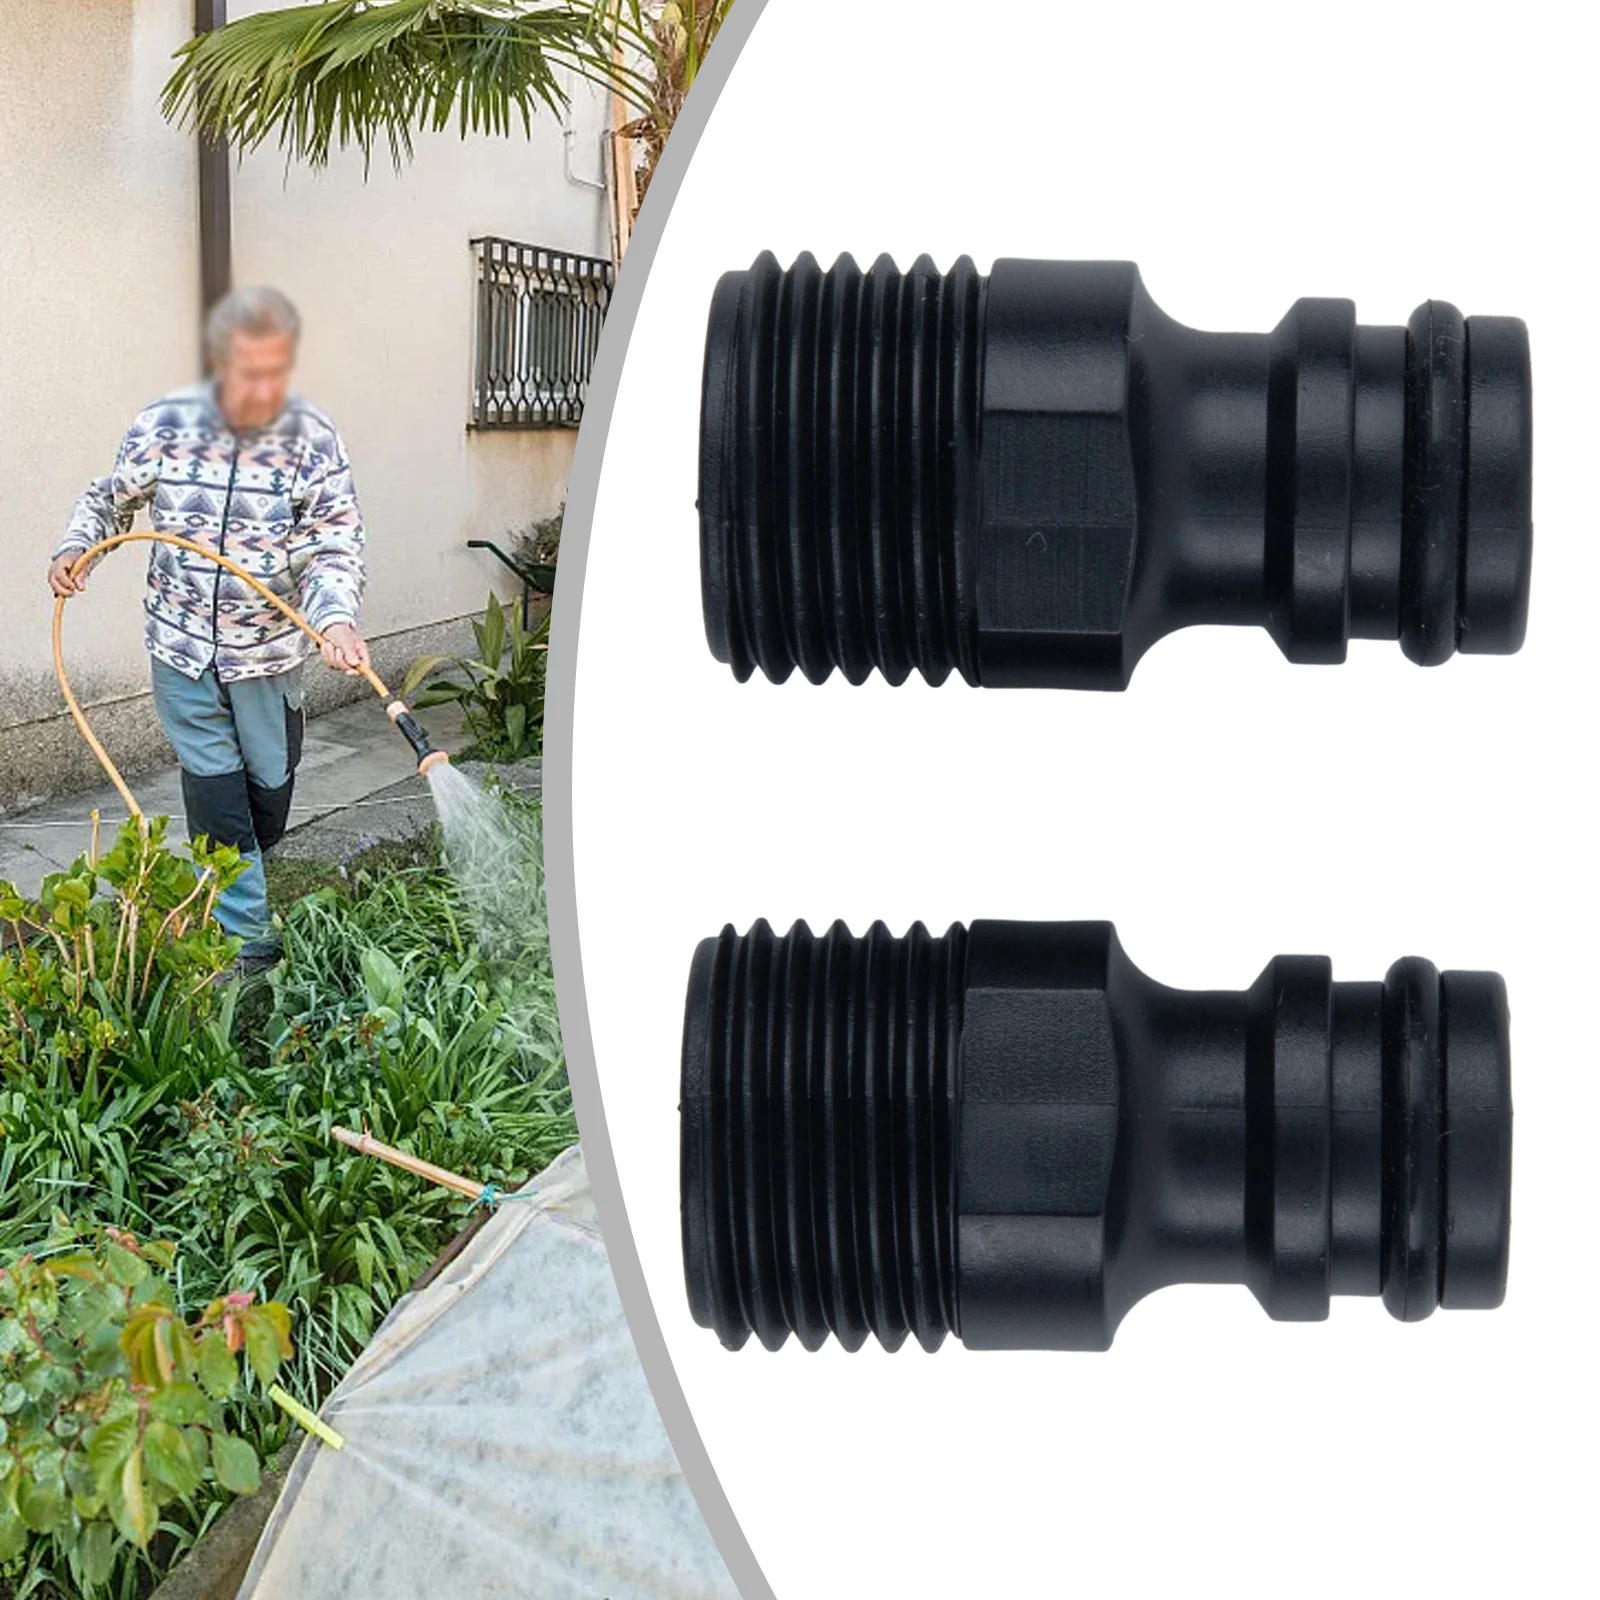 

2 PCS Threaded Tap Adaptors 1/2inch BSP Garden Water Hose Quick Pipe Connector Fitting Garden Irrigation System Parts Adapters